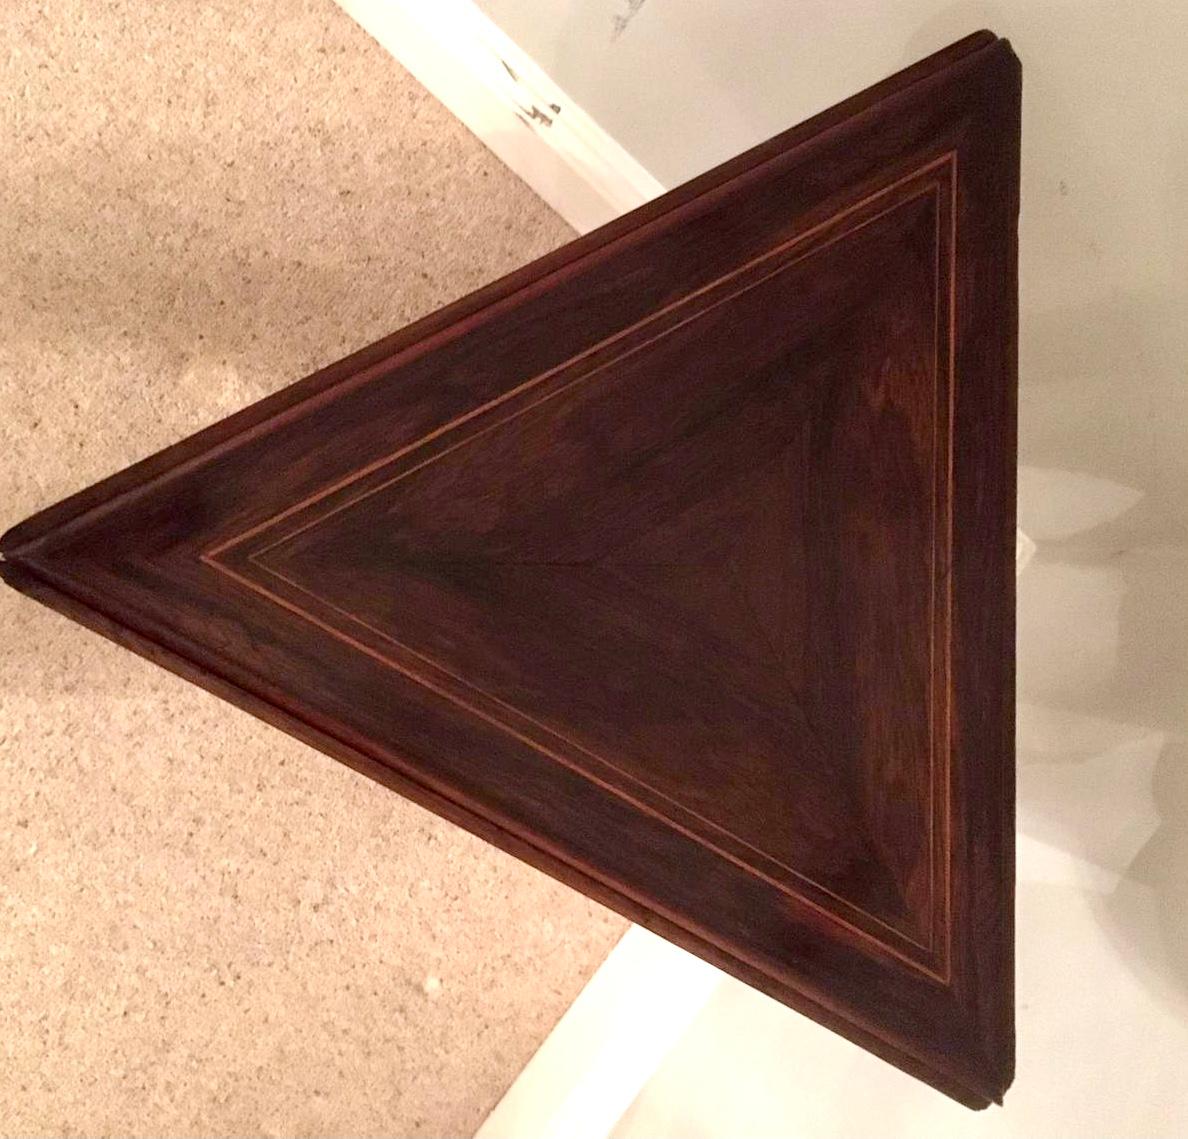  Antique Edwardian Inlaid Drop Leaf Table In Excellent Condition For Sale In Suffolk, GB